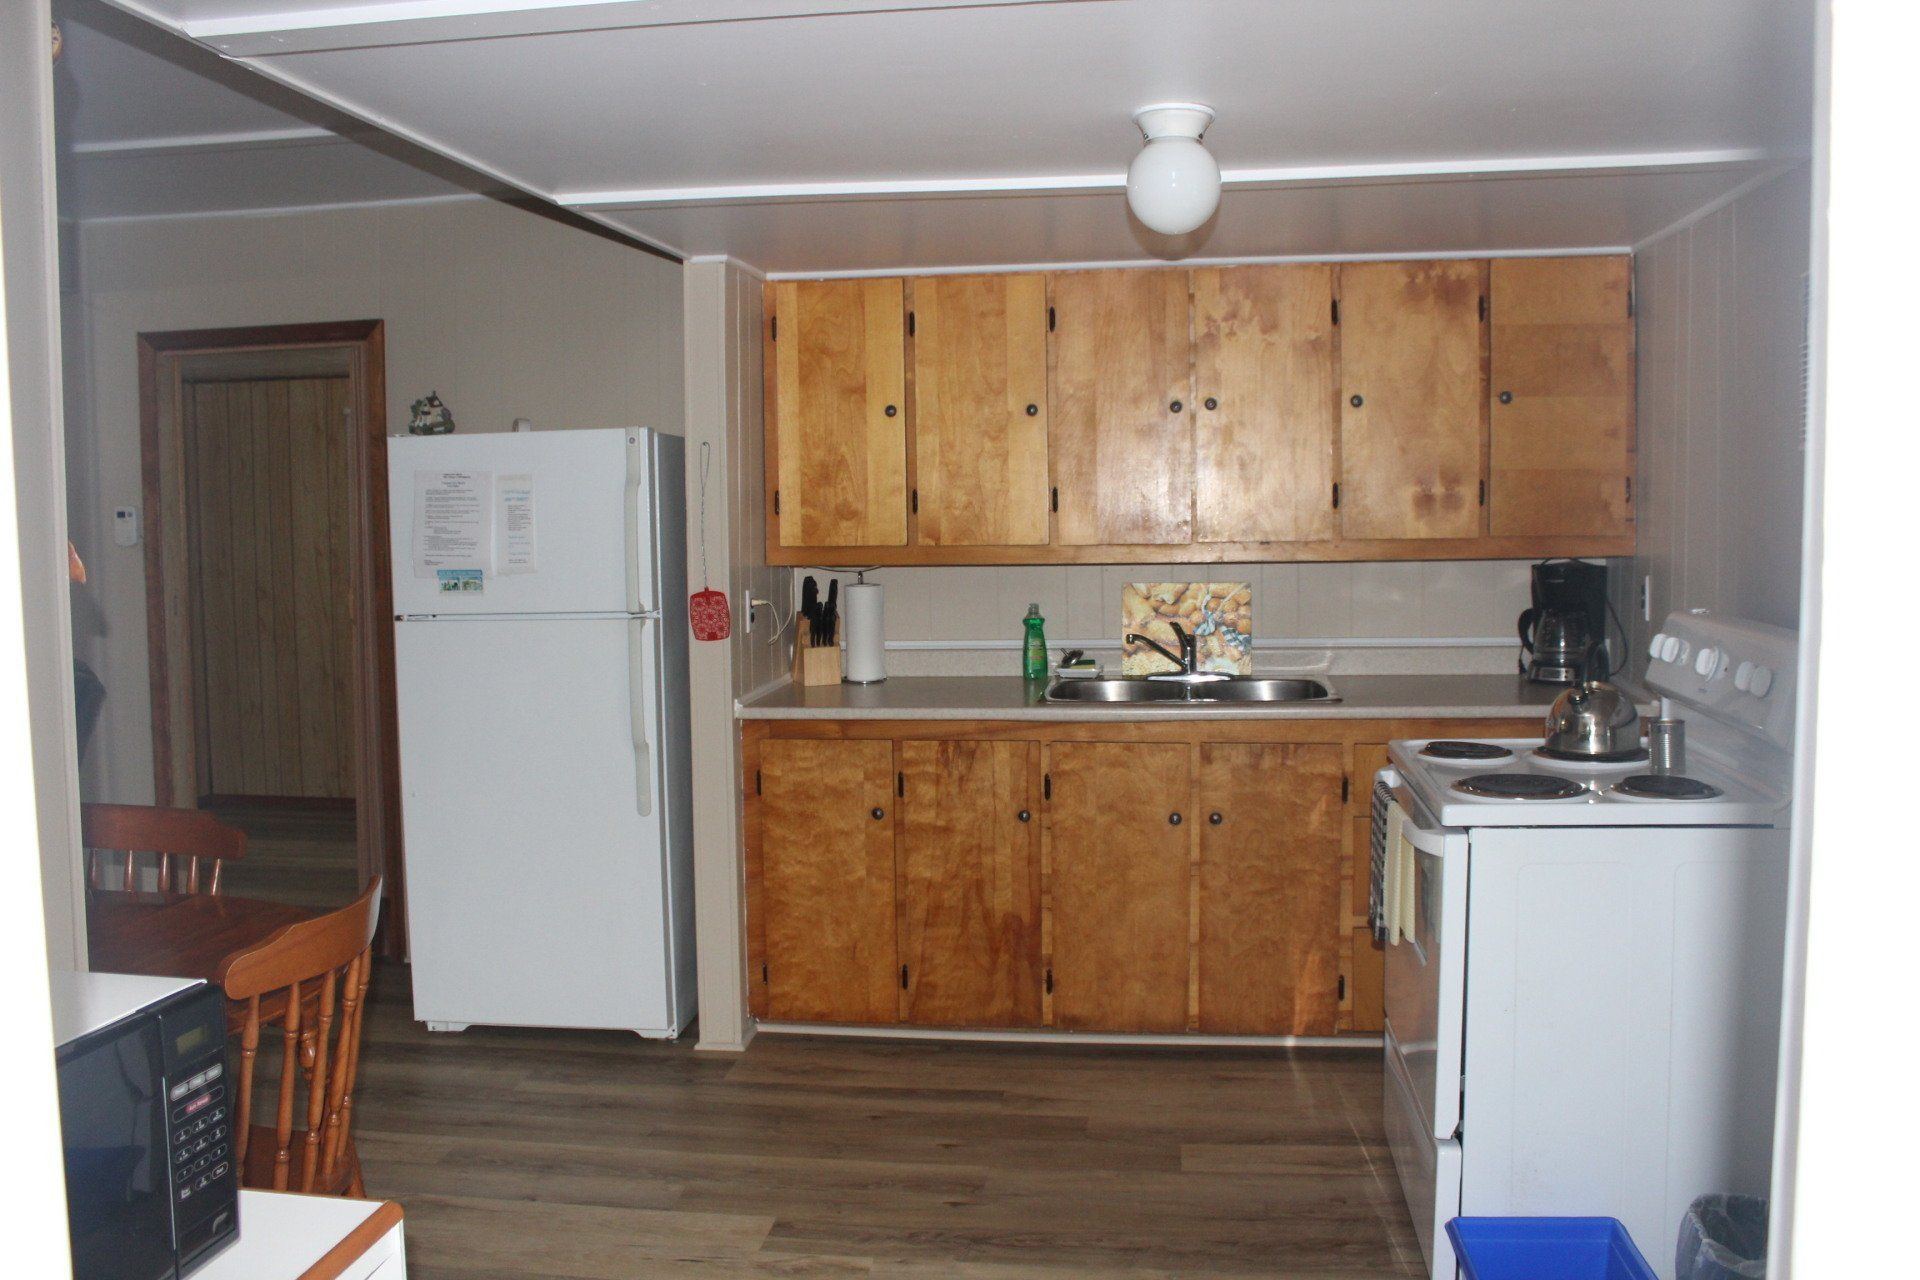 A kitchen with wooden cabinets and a white refrigerator